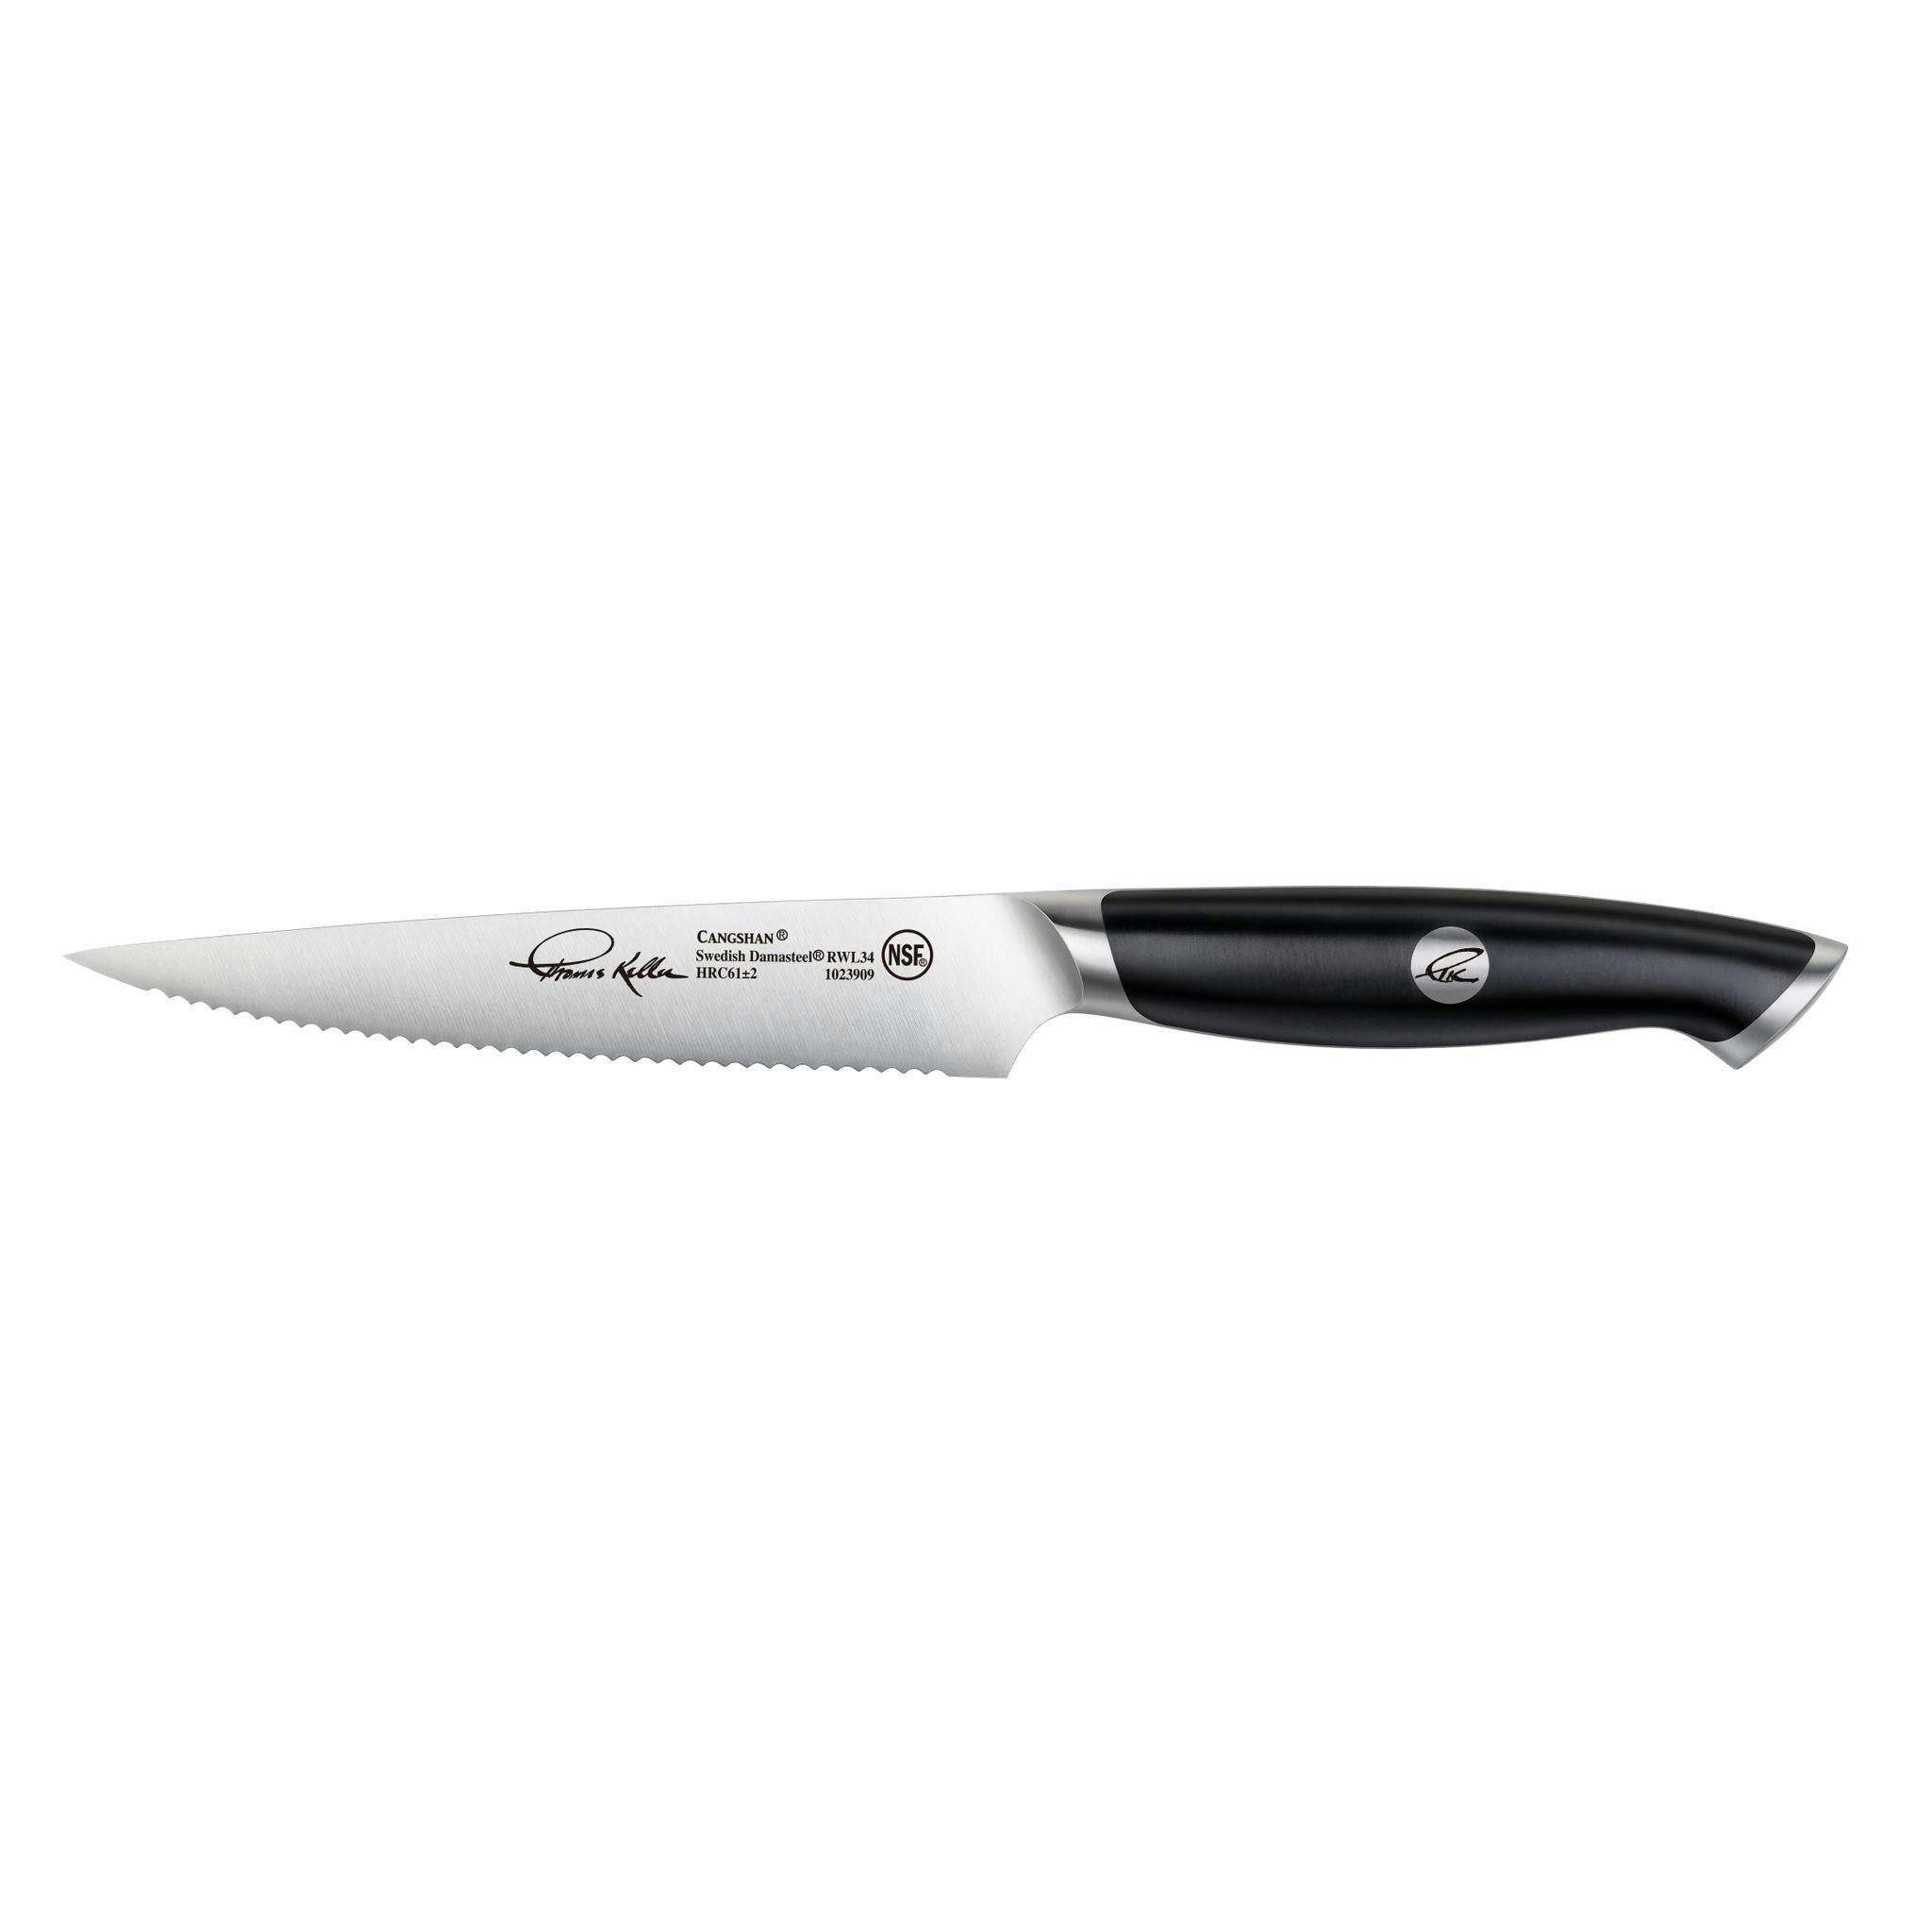 Cangshan Thomas Keller Signature Collection 5" Serrated Utility Knife